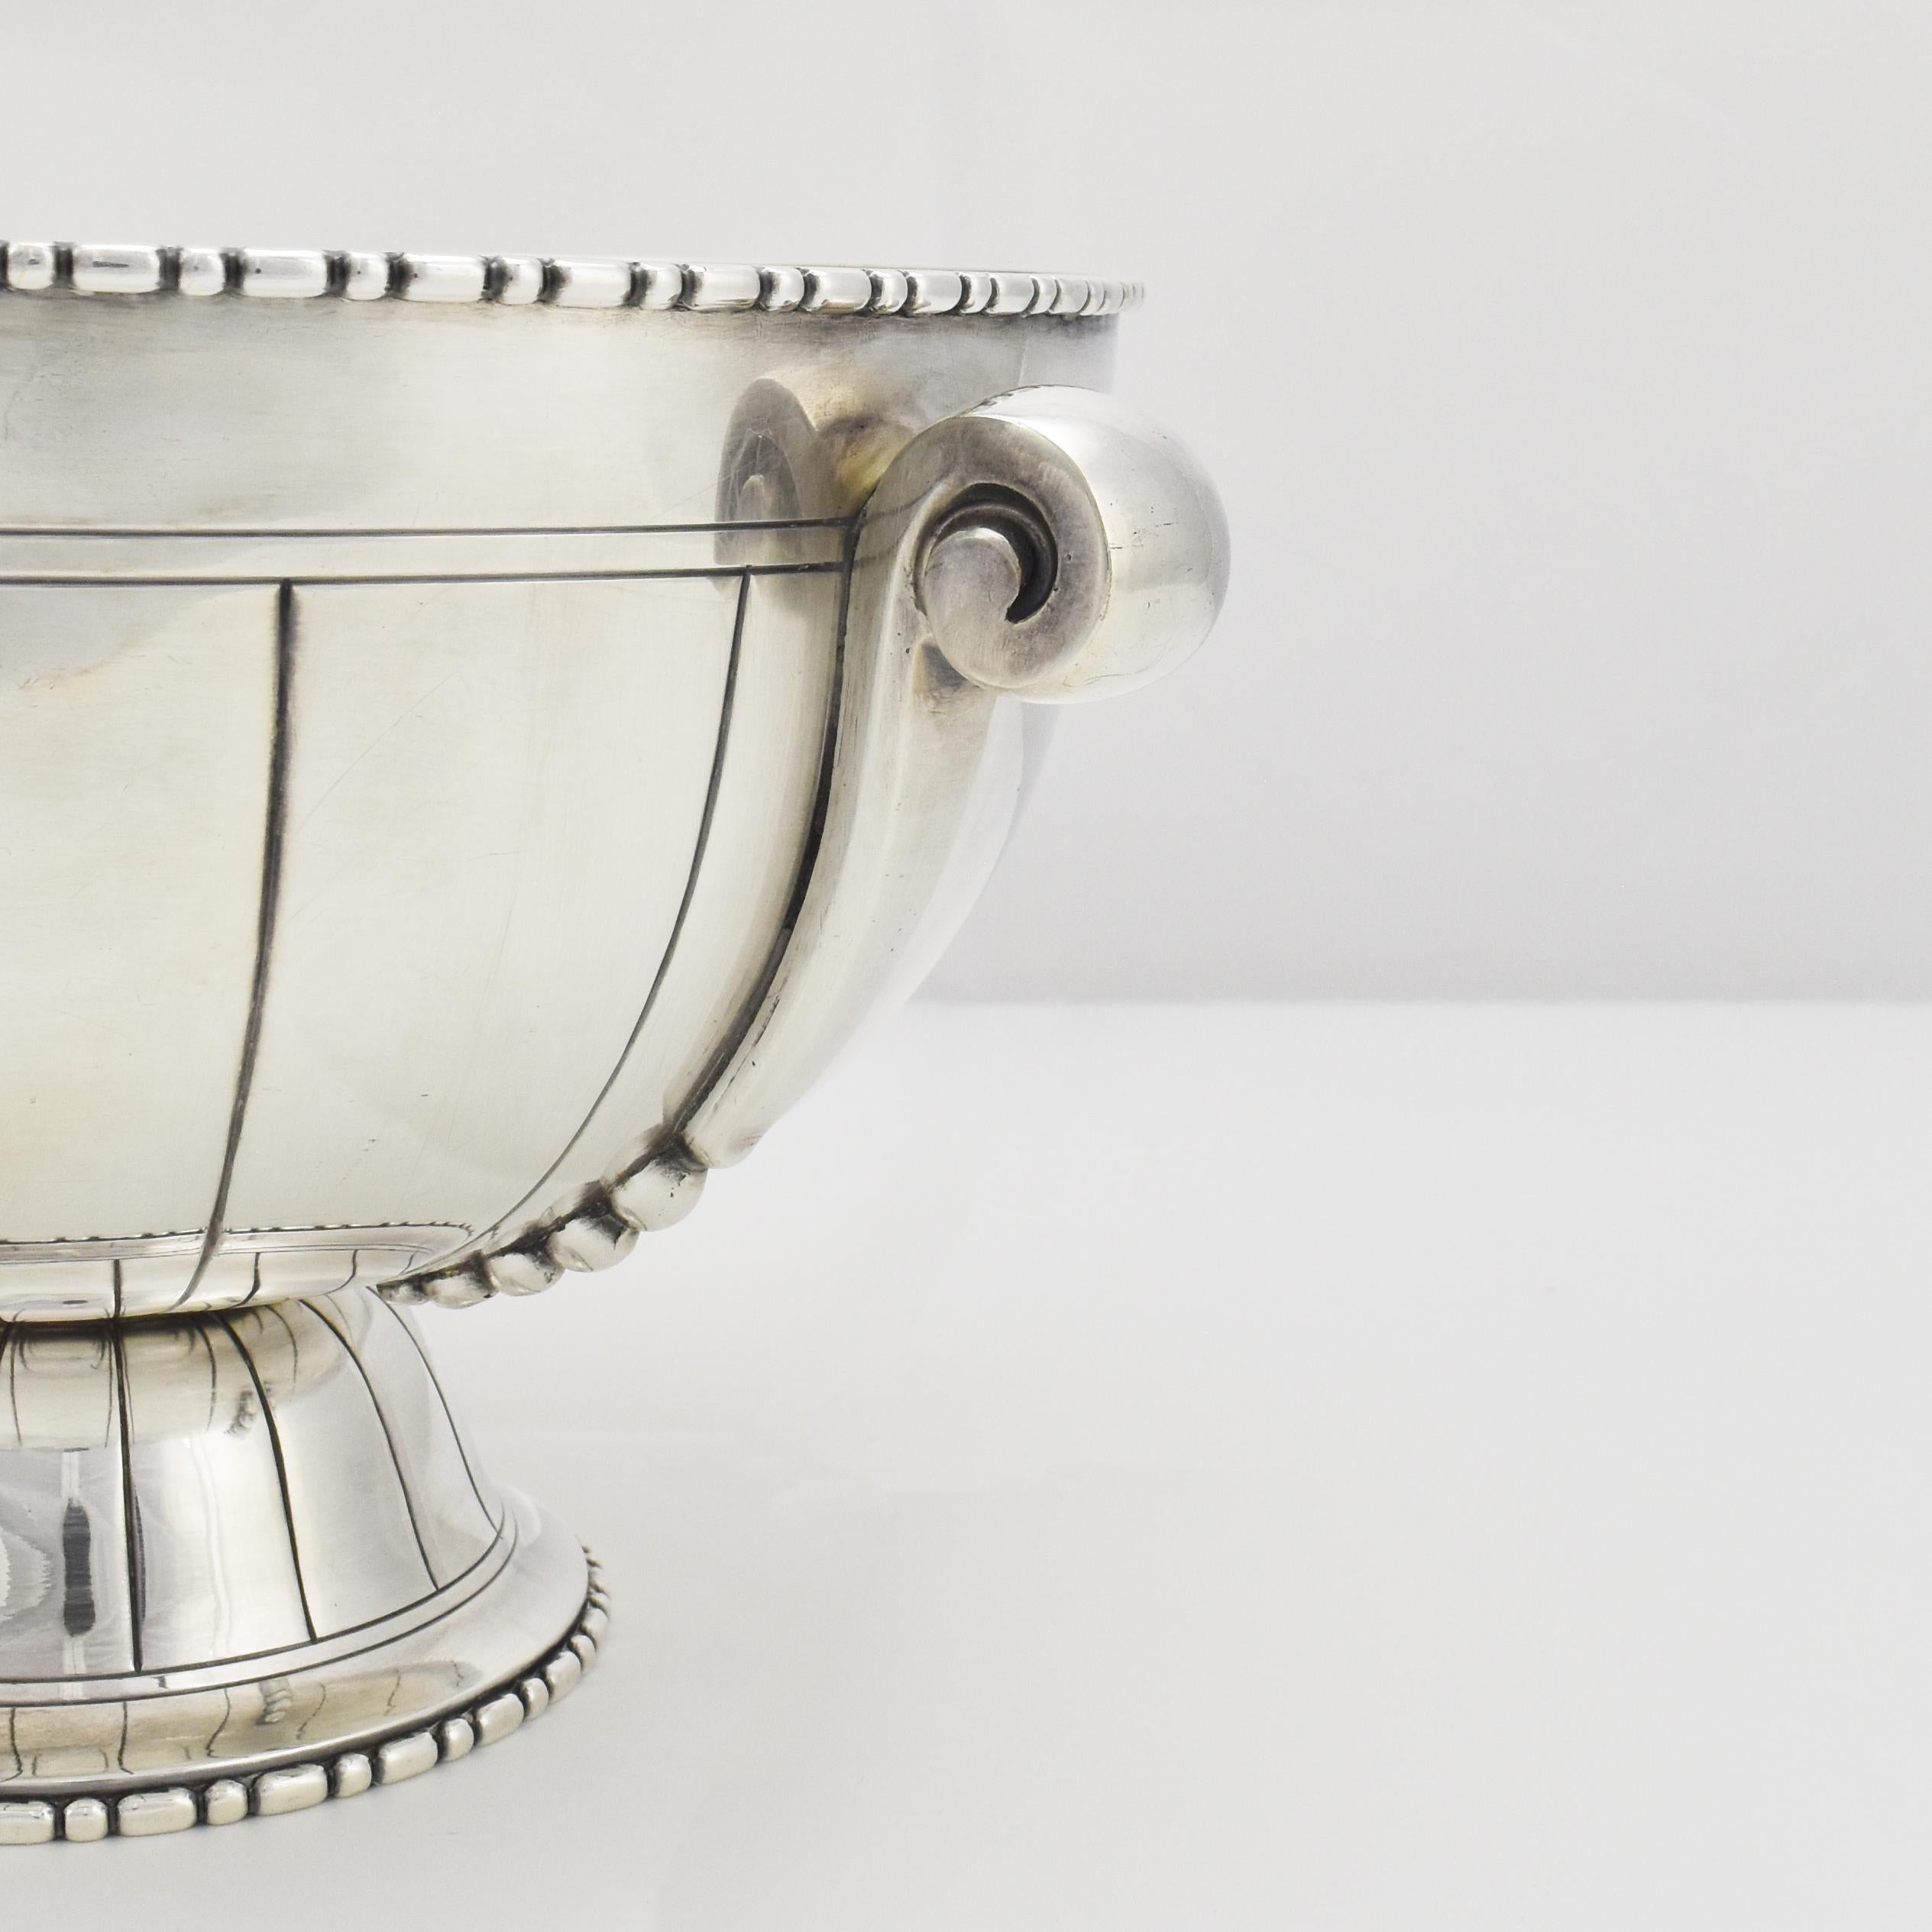 Silvered French Art Deco Centerpiece Silverplate Bowl by Bouillet & Bourdelle 1920s For Sale